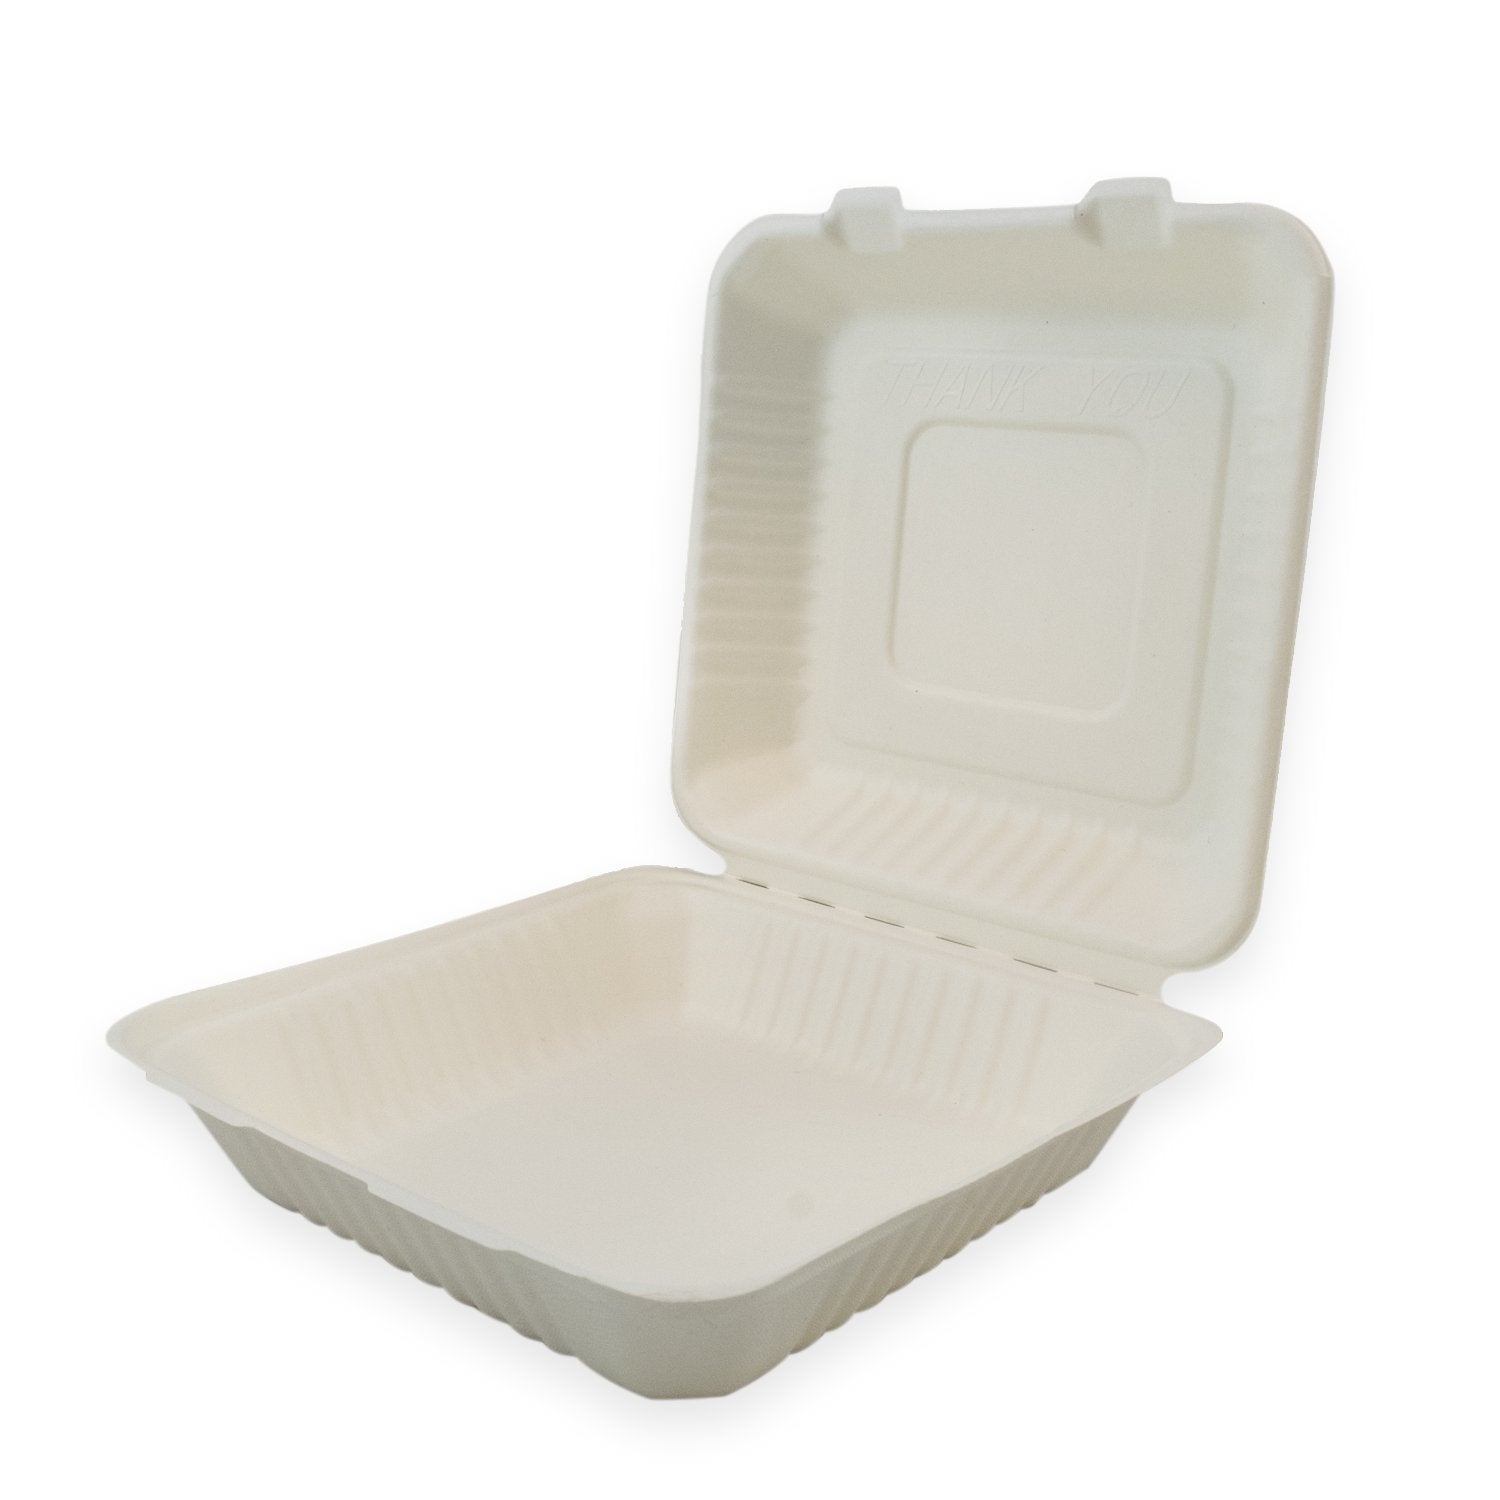 Sustain Sustain Clamshell Sugarcane White 9x9inch - CT/200 Disposable Packaging White Carton of 200